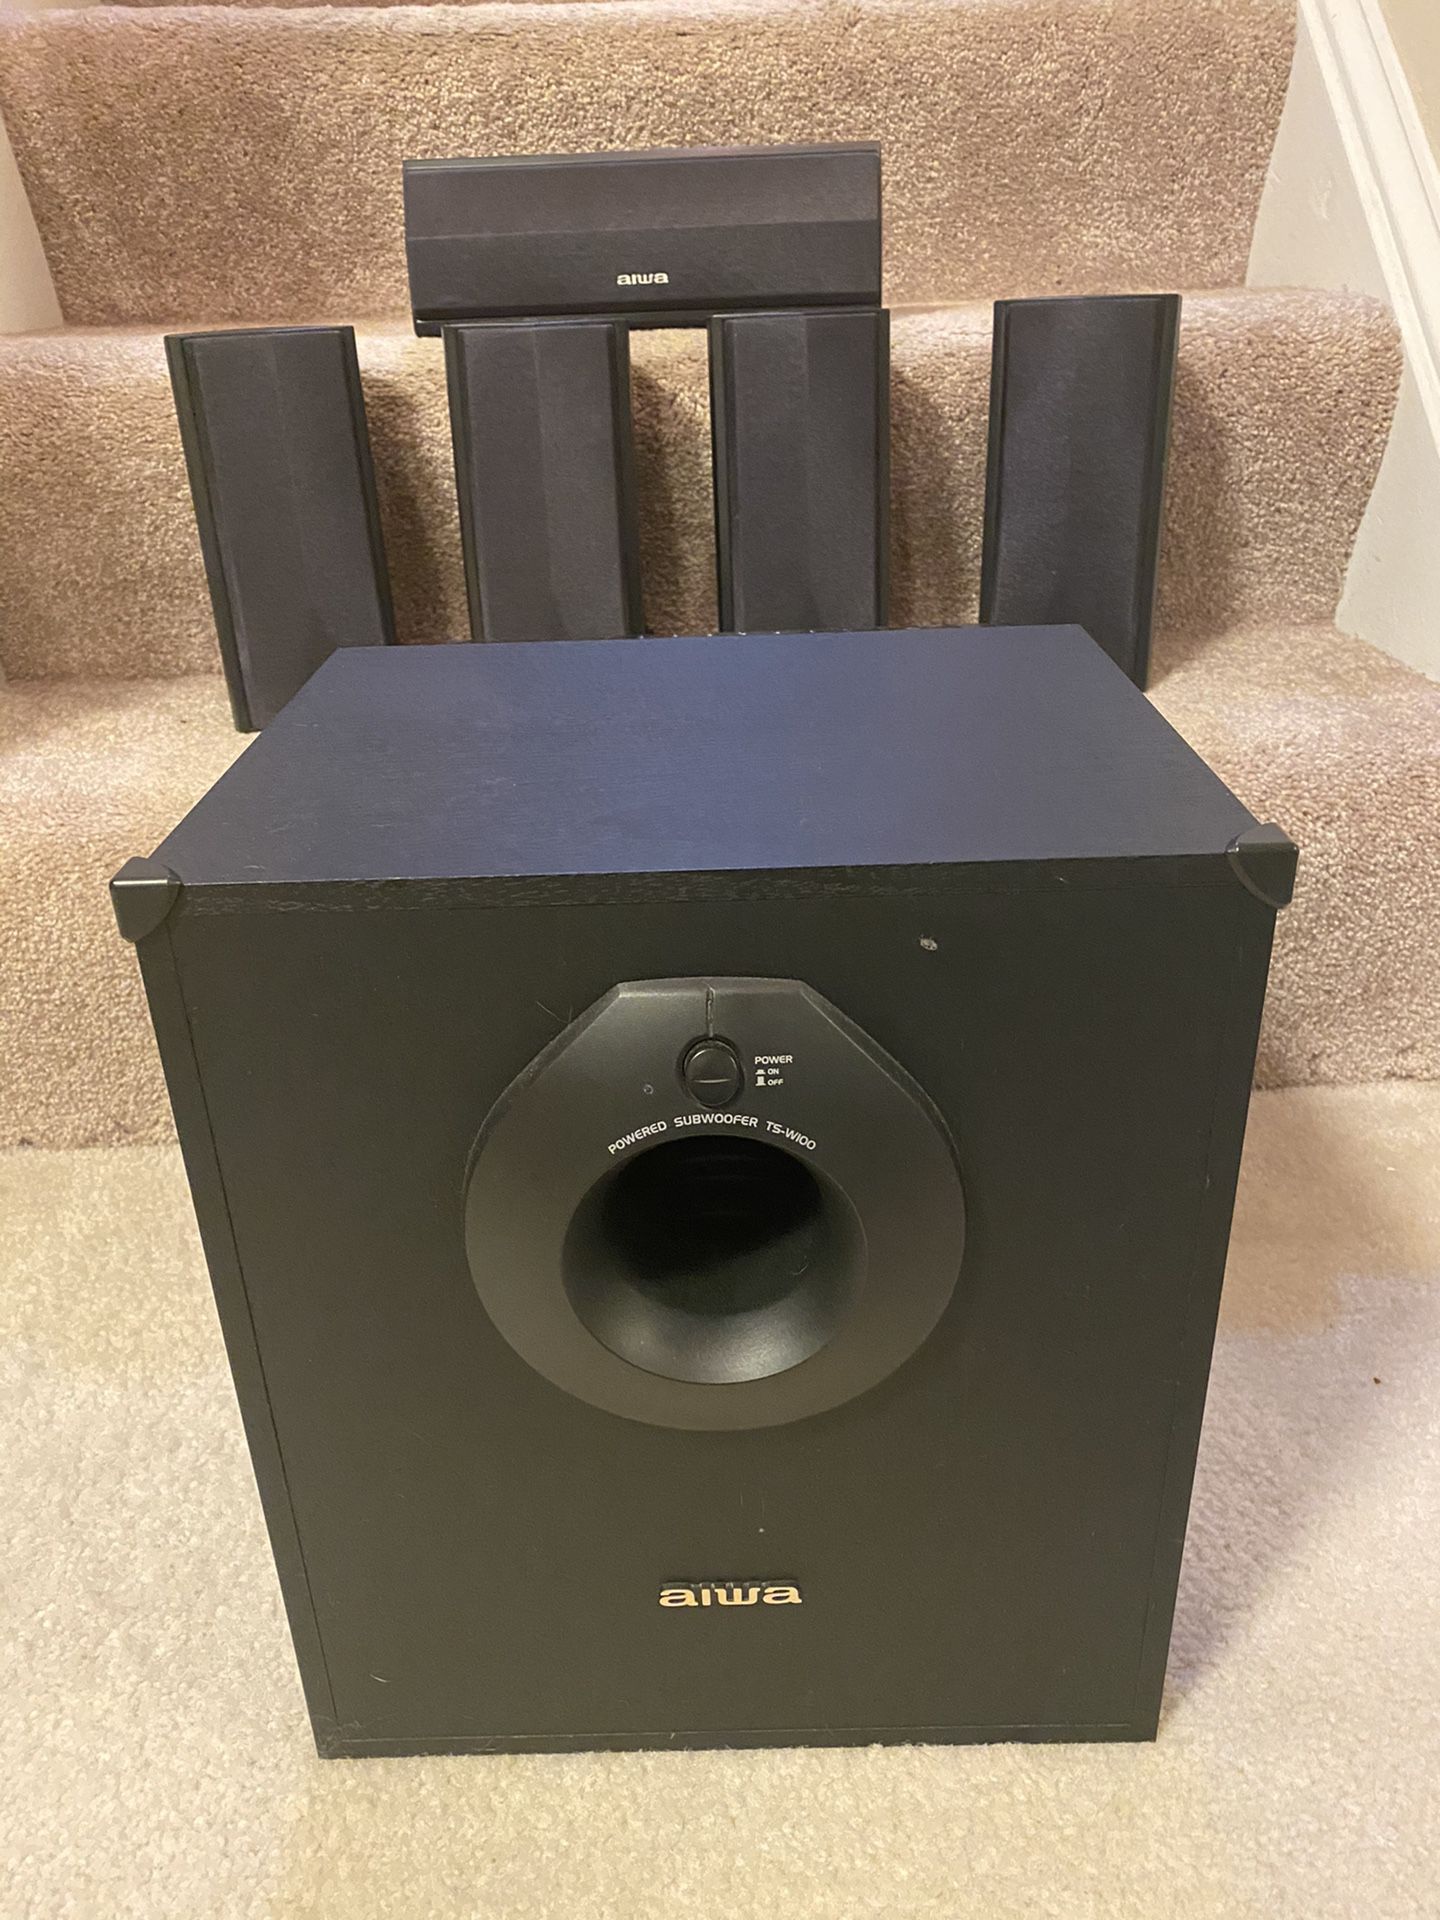 “Pristine Condition” (5) Aiwa Surround Sound Speakers and (1) Powered Subwoofer TS-W100